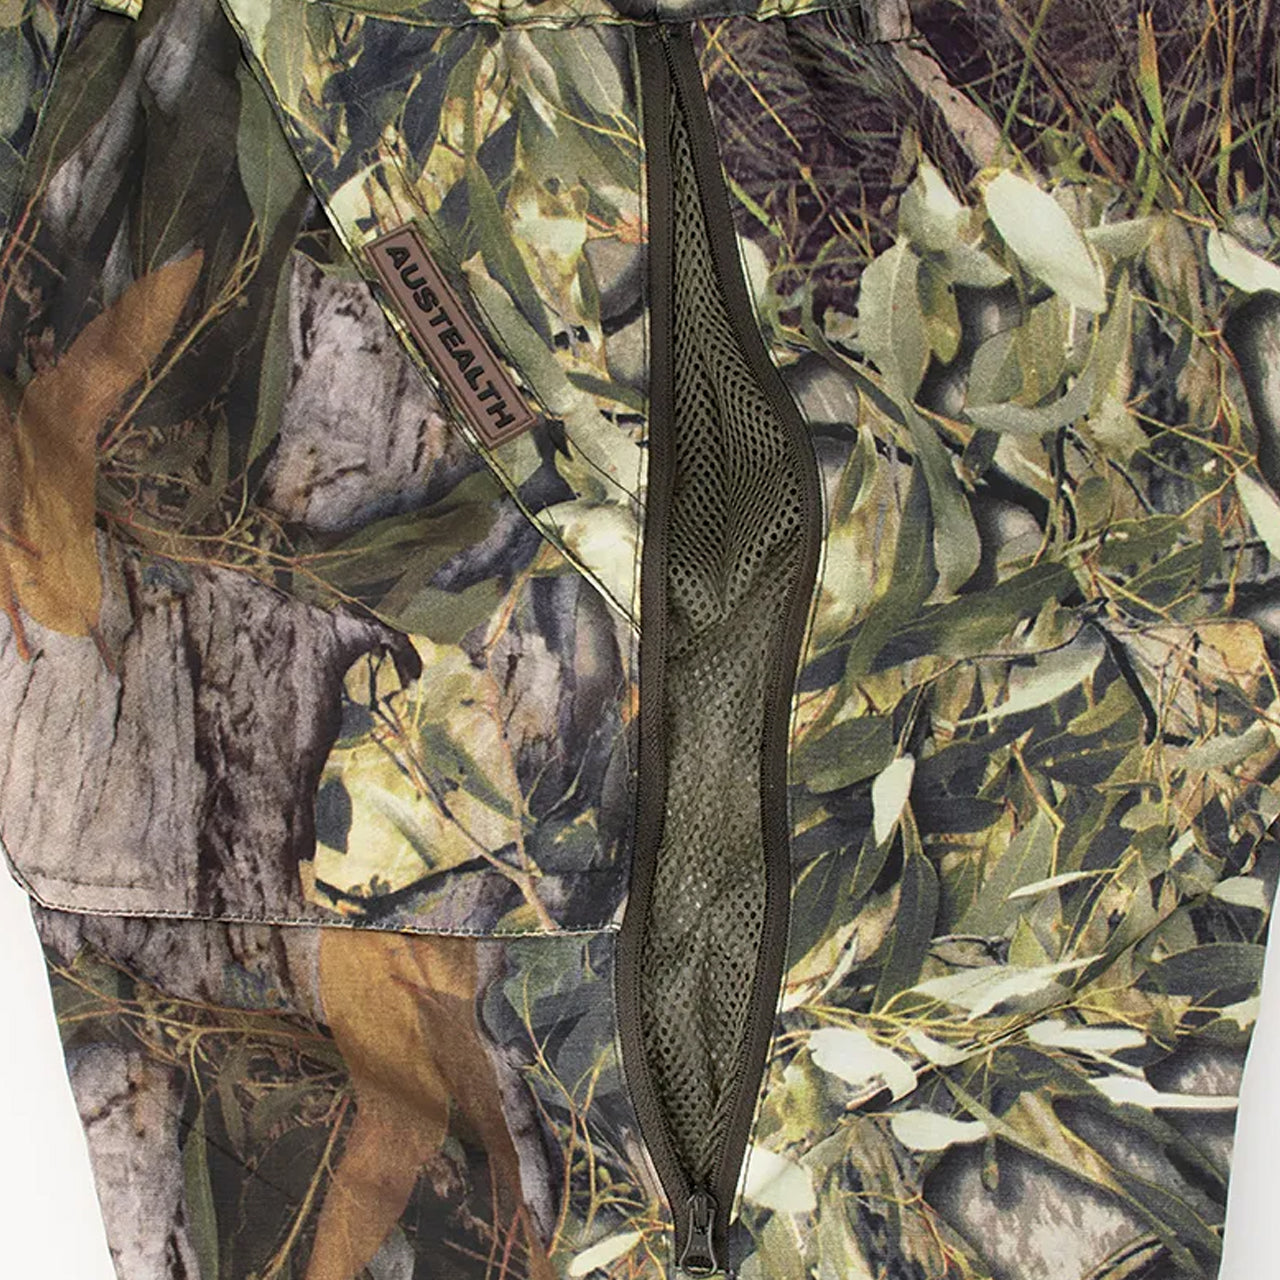 Unbeatable comfort and style come together with Austealth's Camo Shorts! Featuring Archroma Tech Taslon Nylon fabric and lightweight elastic sides, you'll stay cool and safe with UV protection. www.defenceqstore.com.au